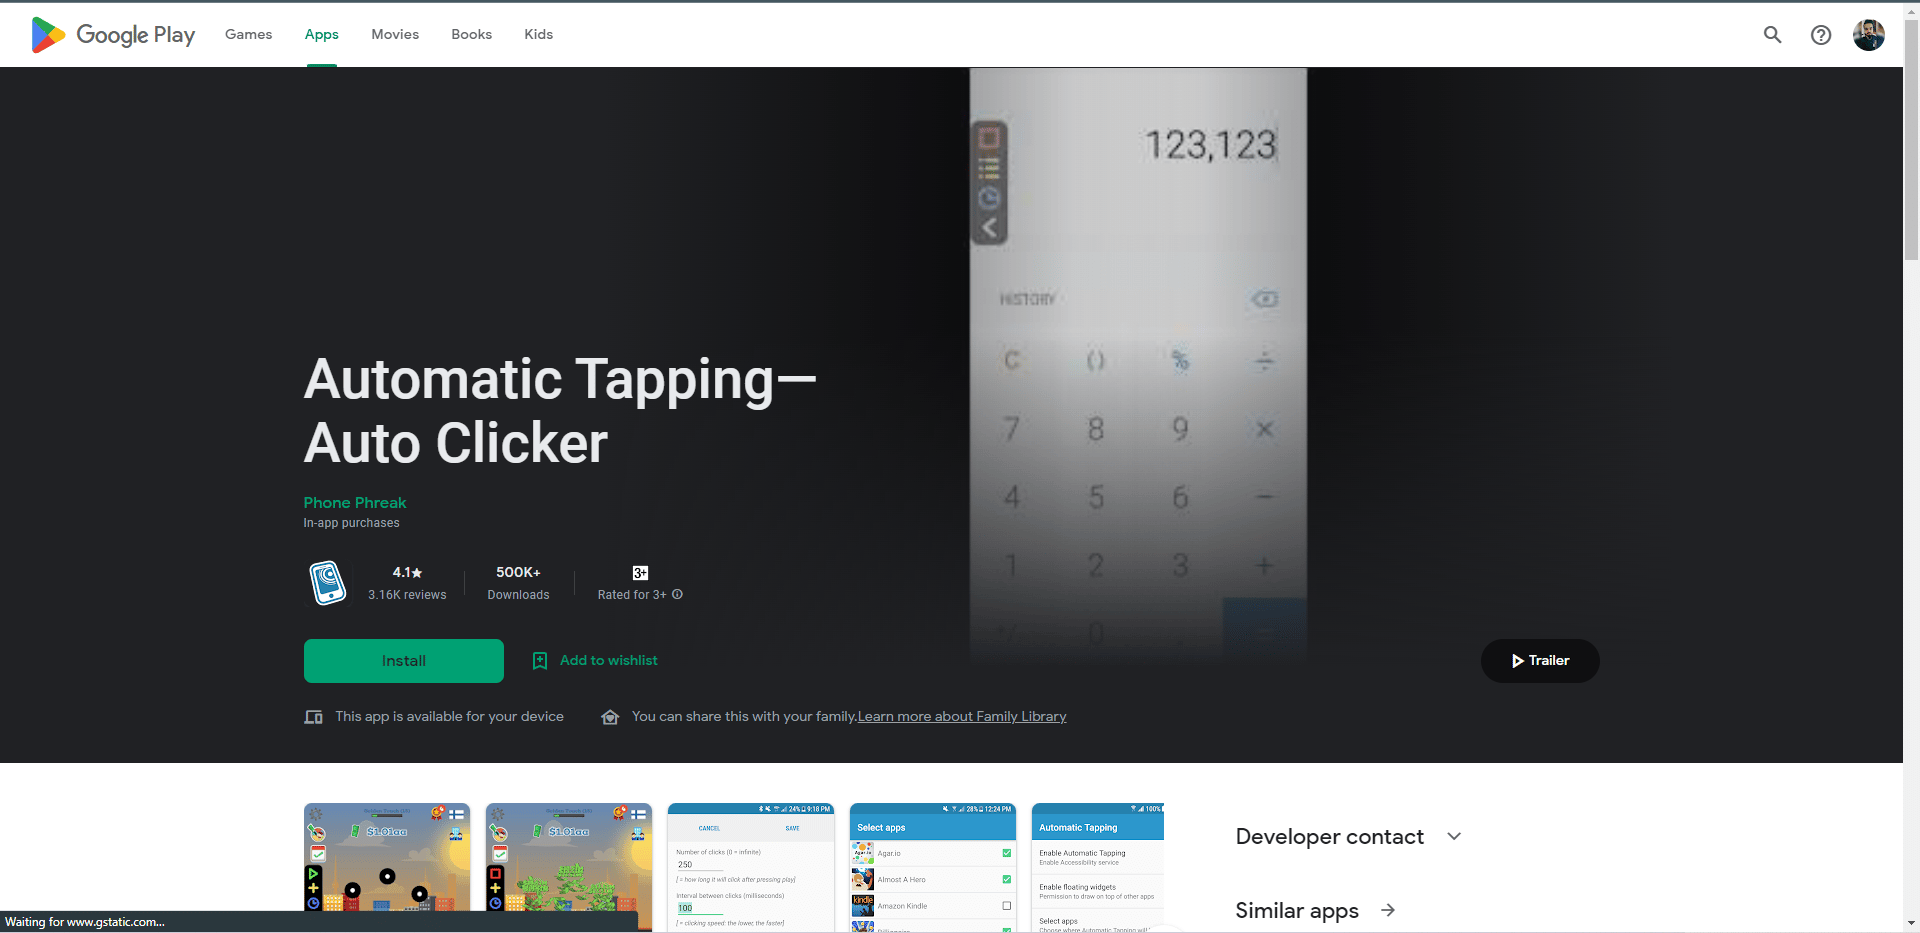 Automatic Tapping Auto Clicker Play Store webpage